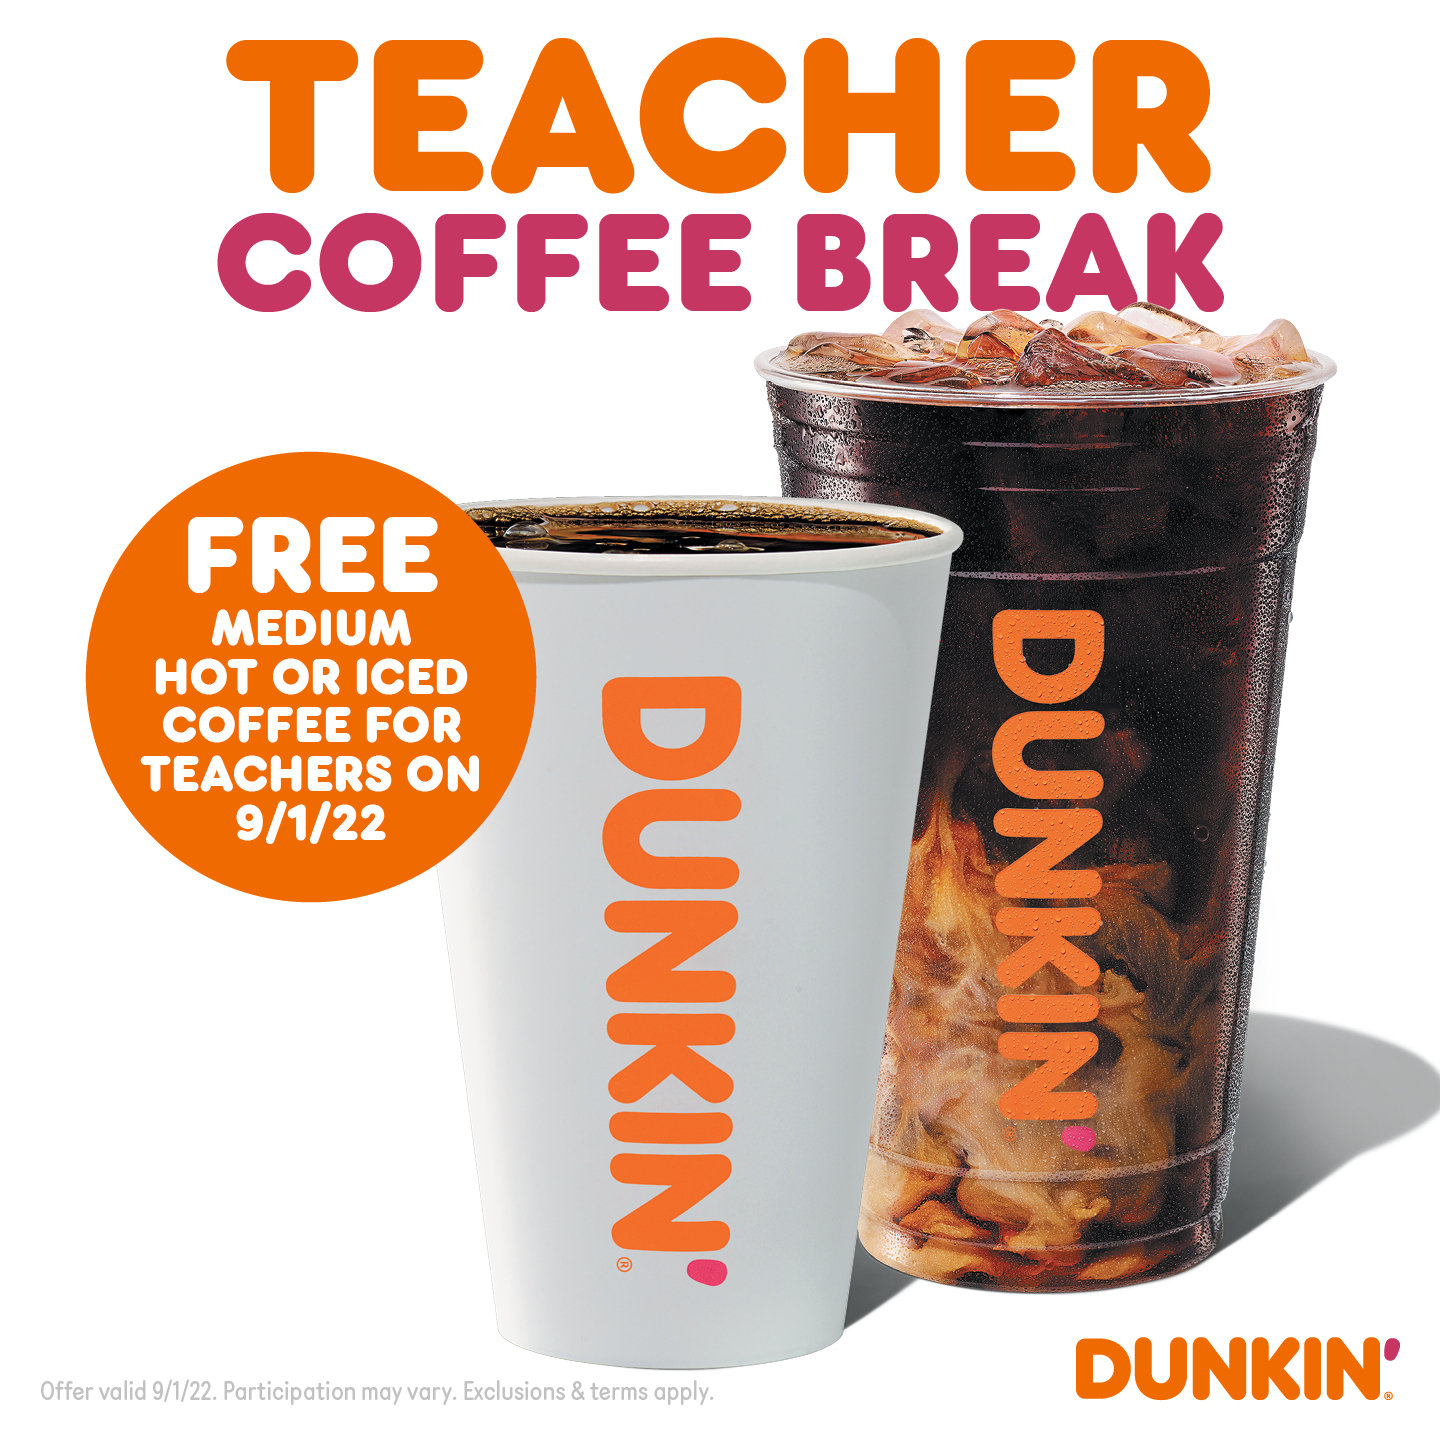 In celebration of all local teachers, participating Dunkin’ restaurants throughout the Mohawk Valley are treating educators to a free medium hot or iced coffee on Thursday, Sept 1, limited to one per teacher and excluding cold brew and nitro cold brew.